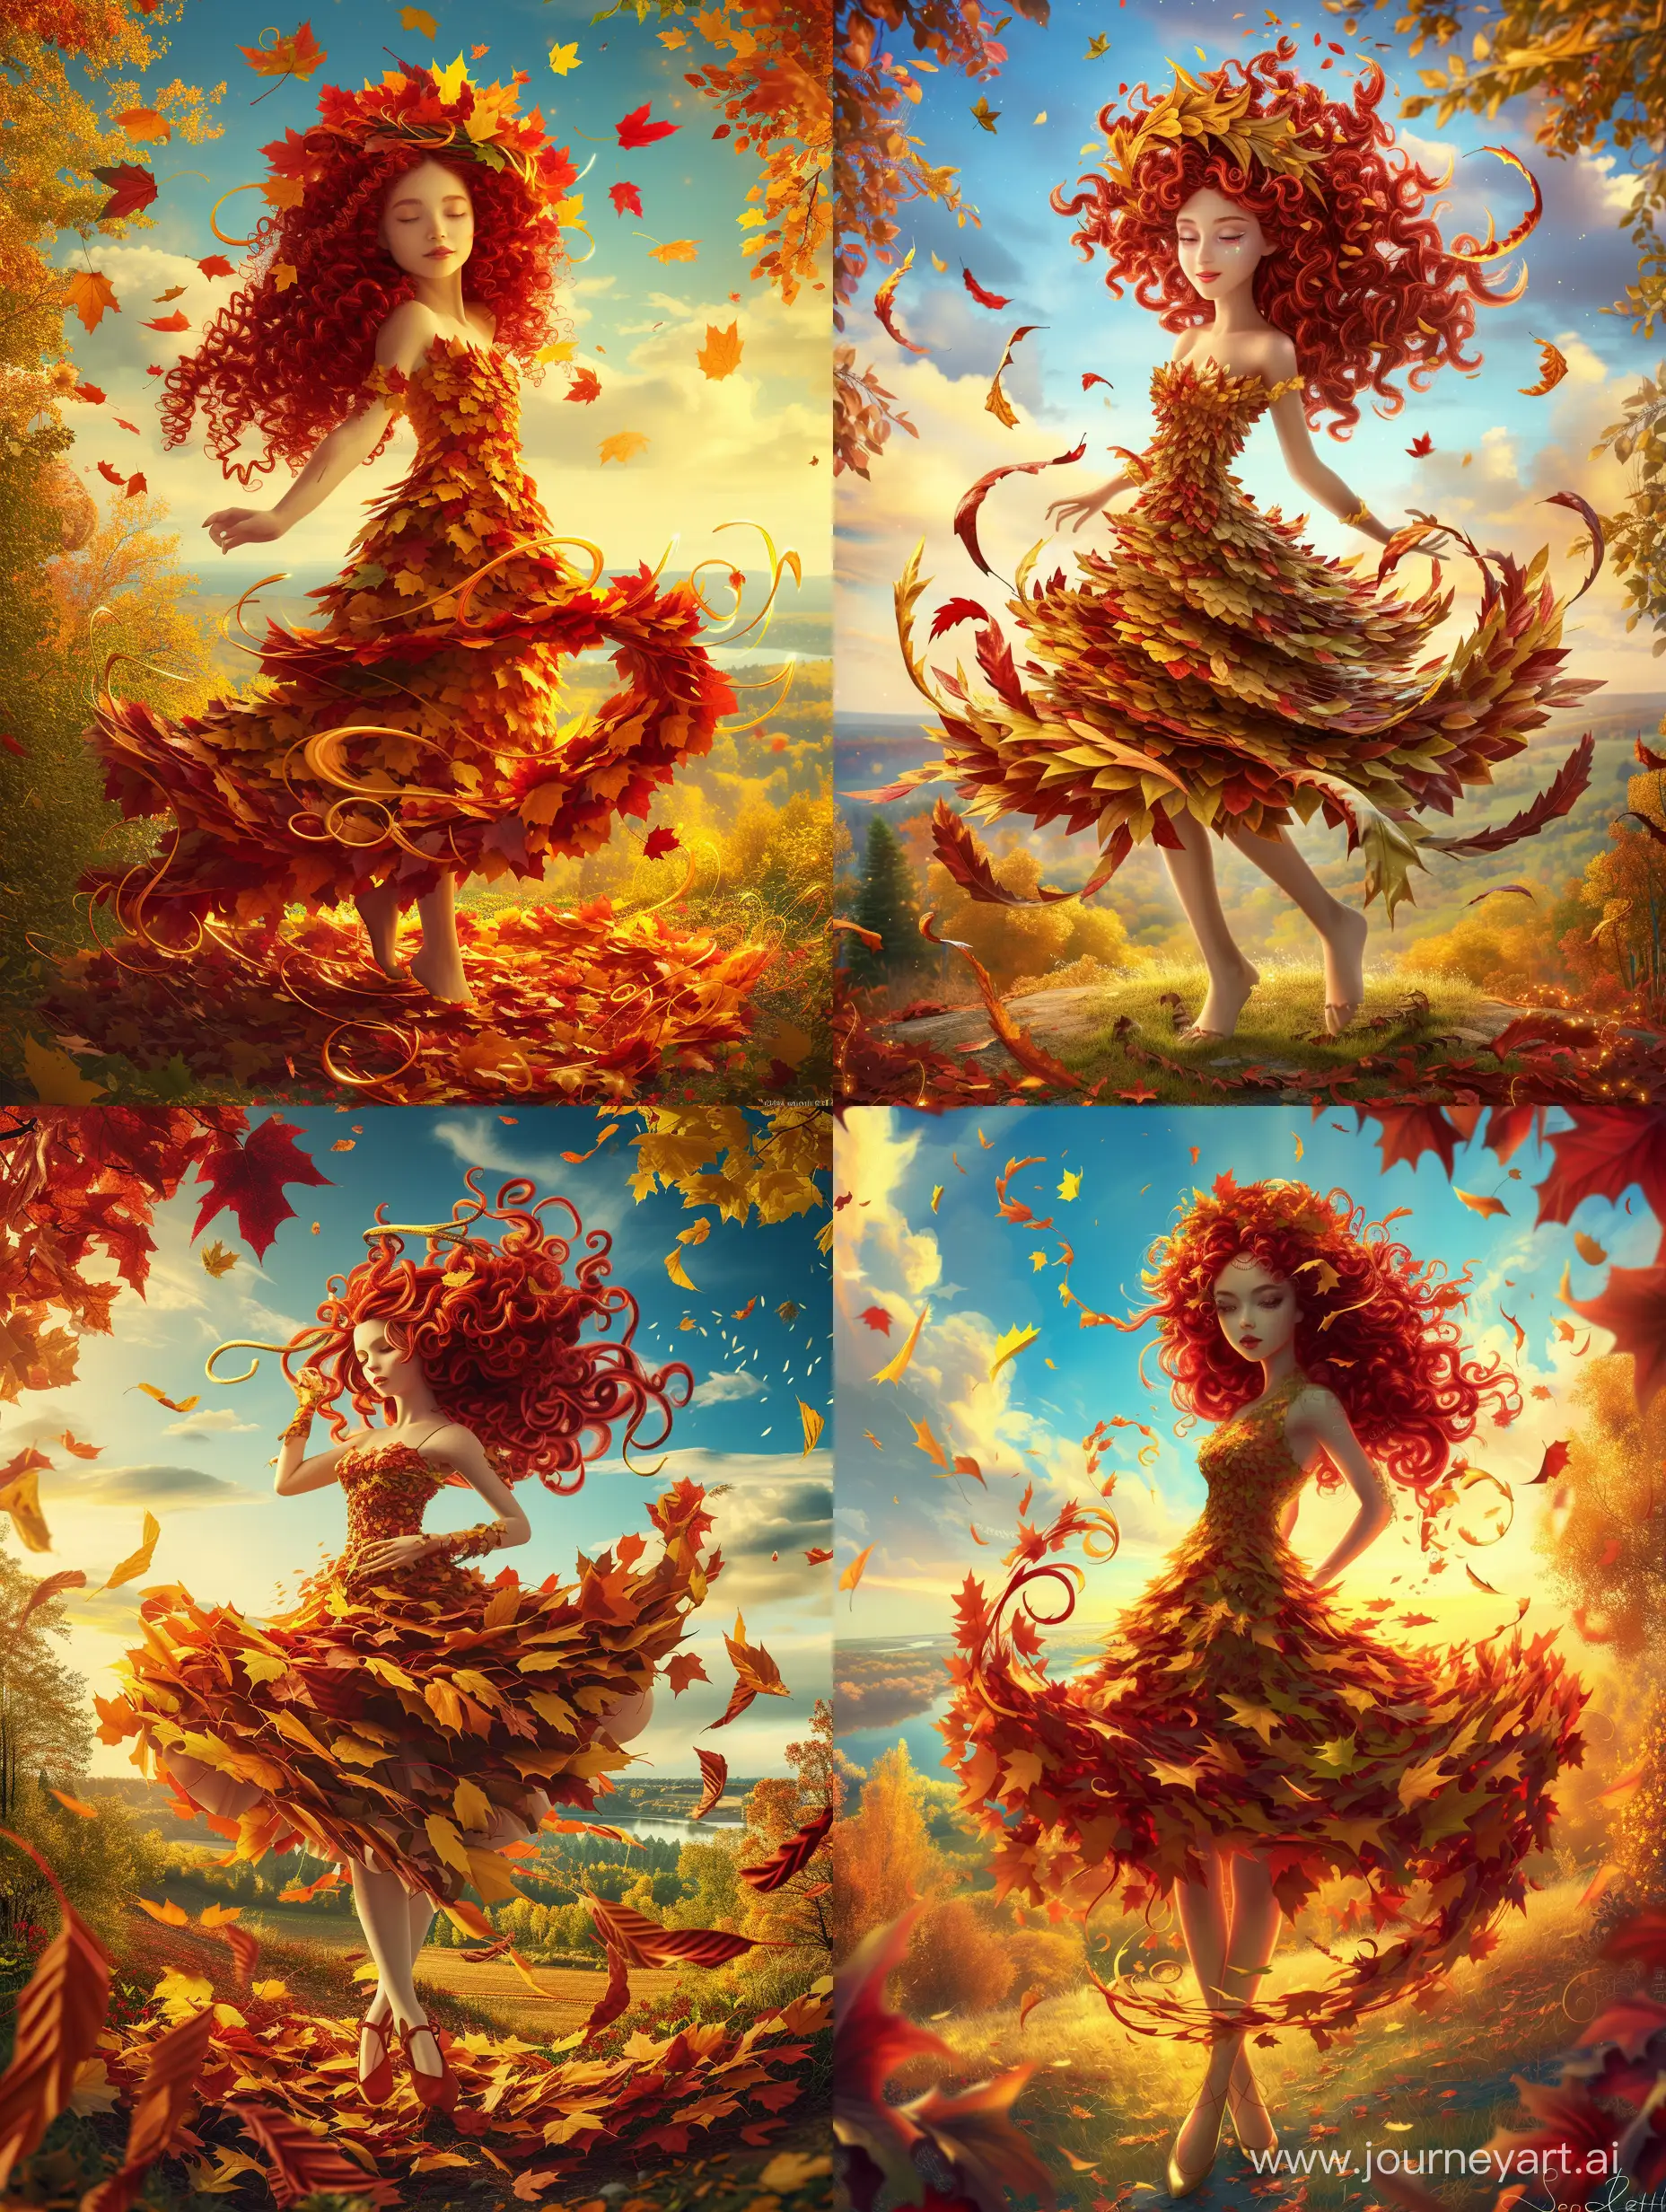 Enchanting-Autumn-Queen-Dancing-in-a-Pixelated-Forest